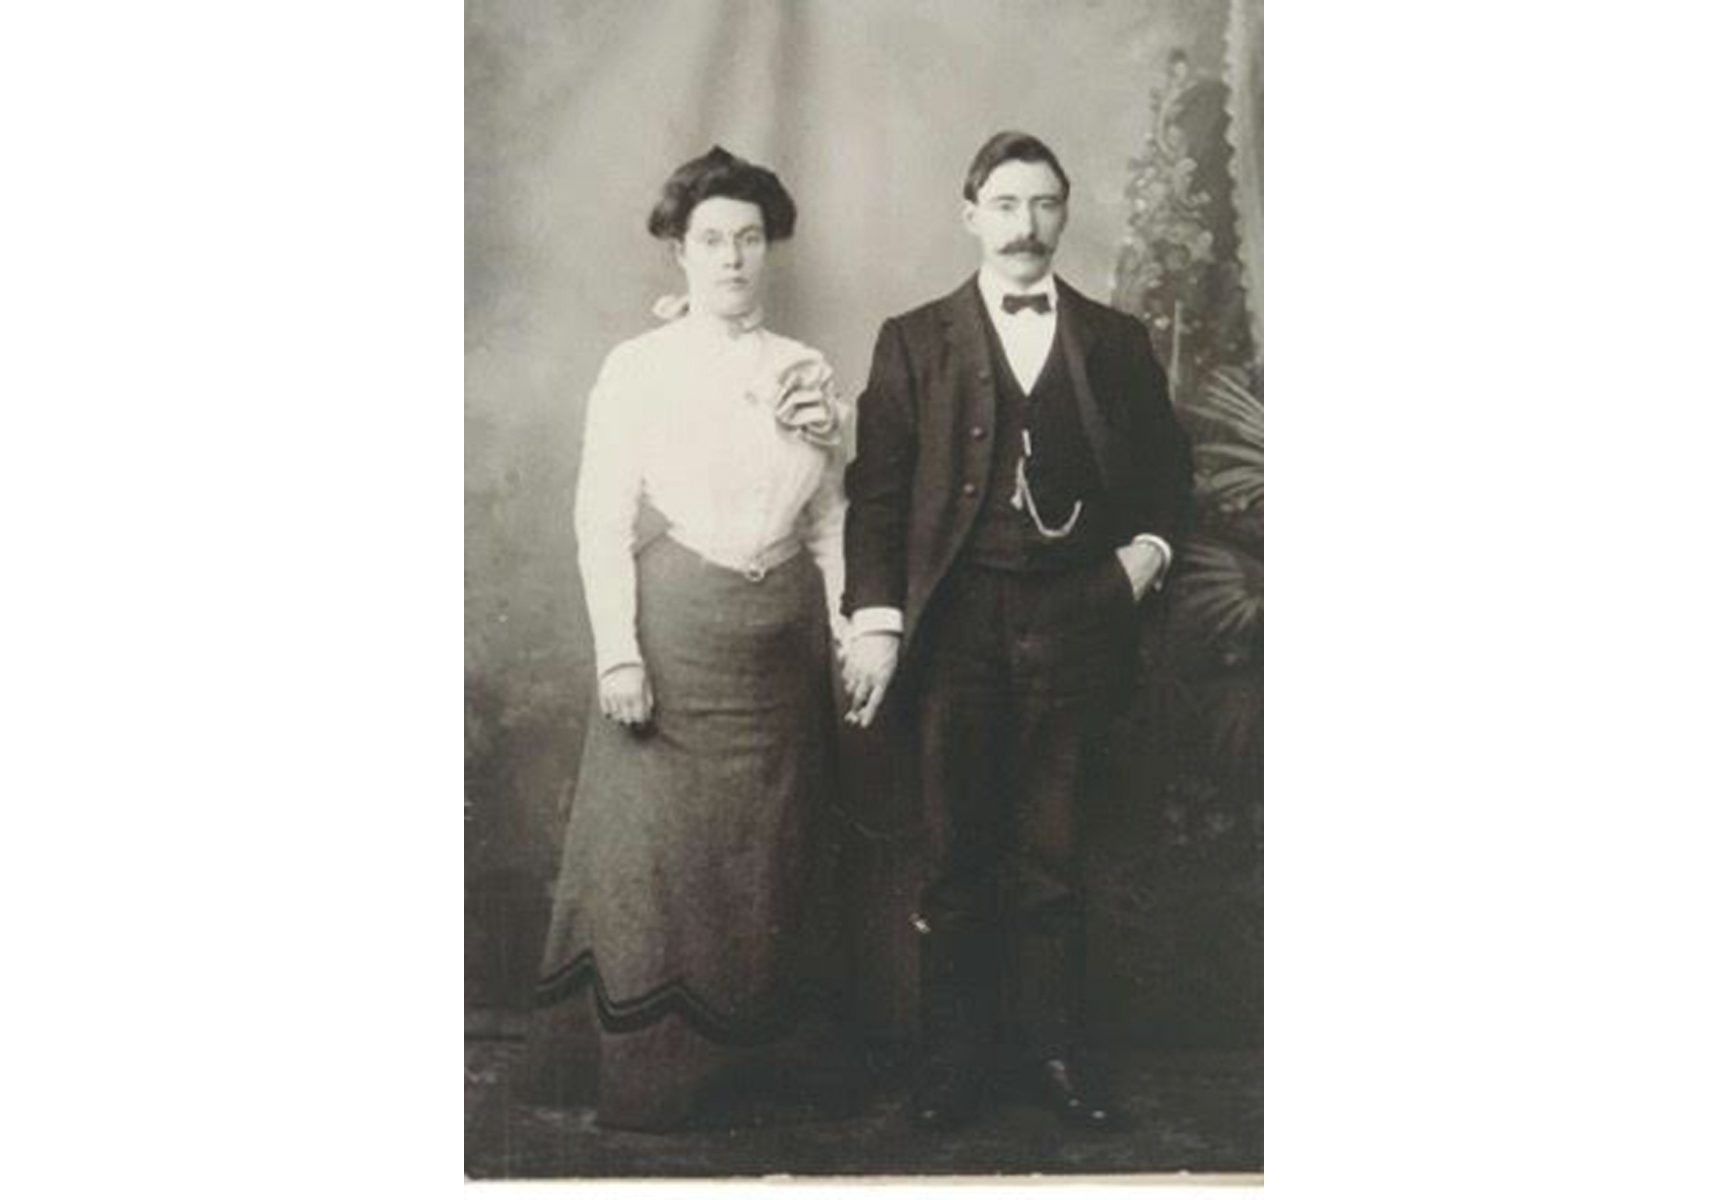 Eleanor and Michael Kirwin from Horseleap Cross, Co. Galway who immigrated in the 1890s to Boston, where many of their descendants still live.